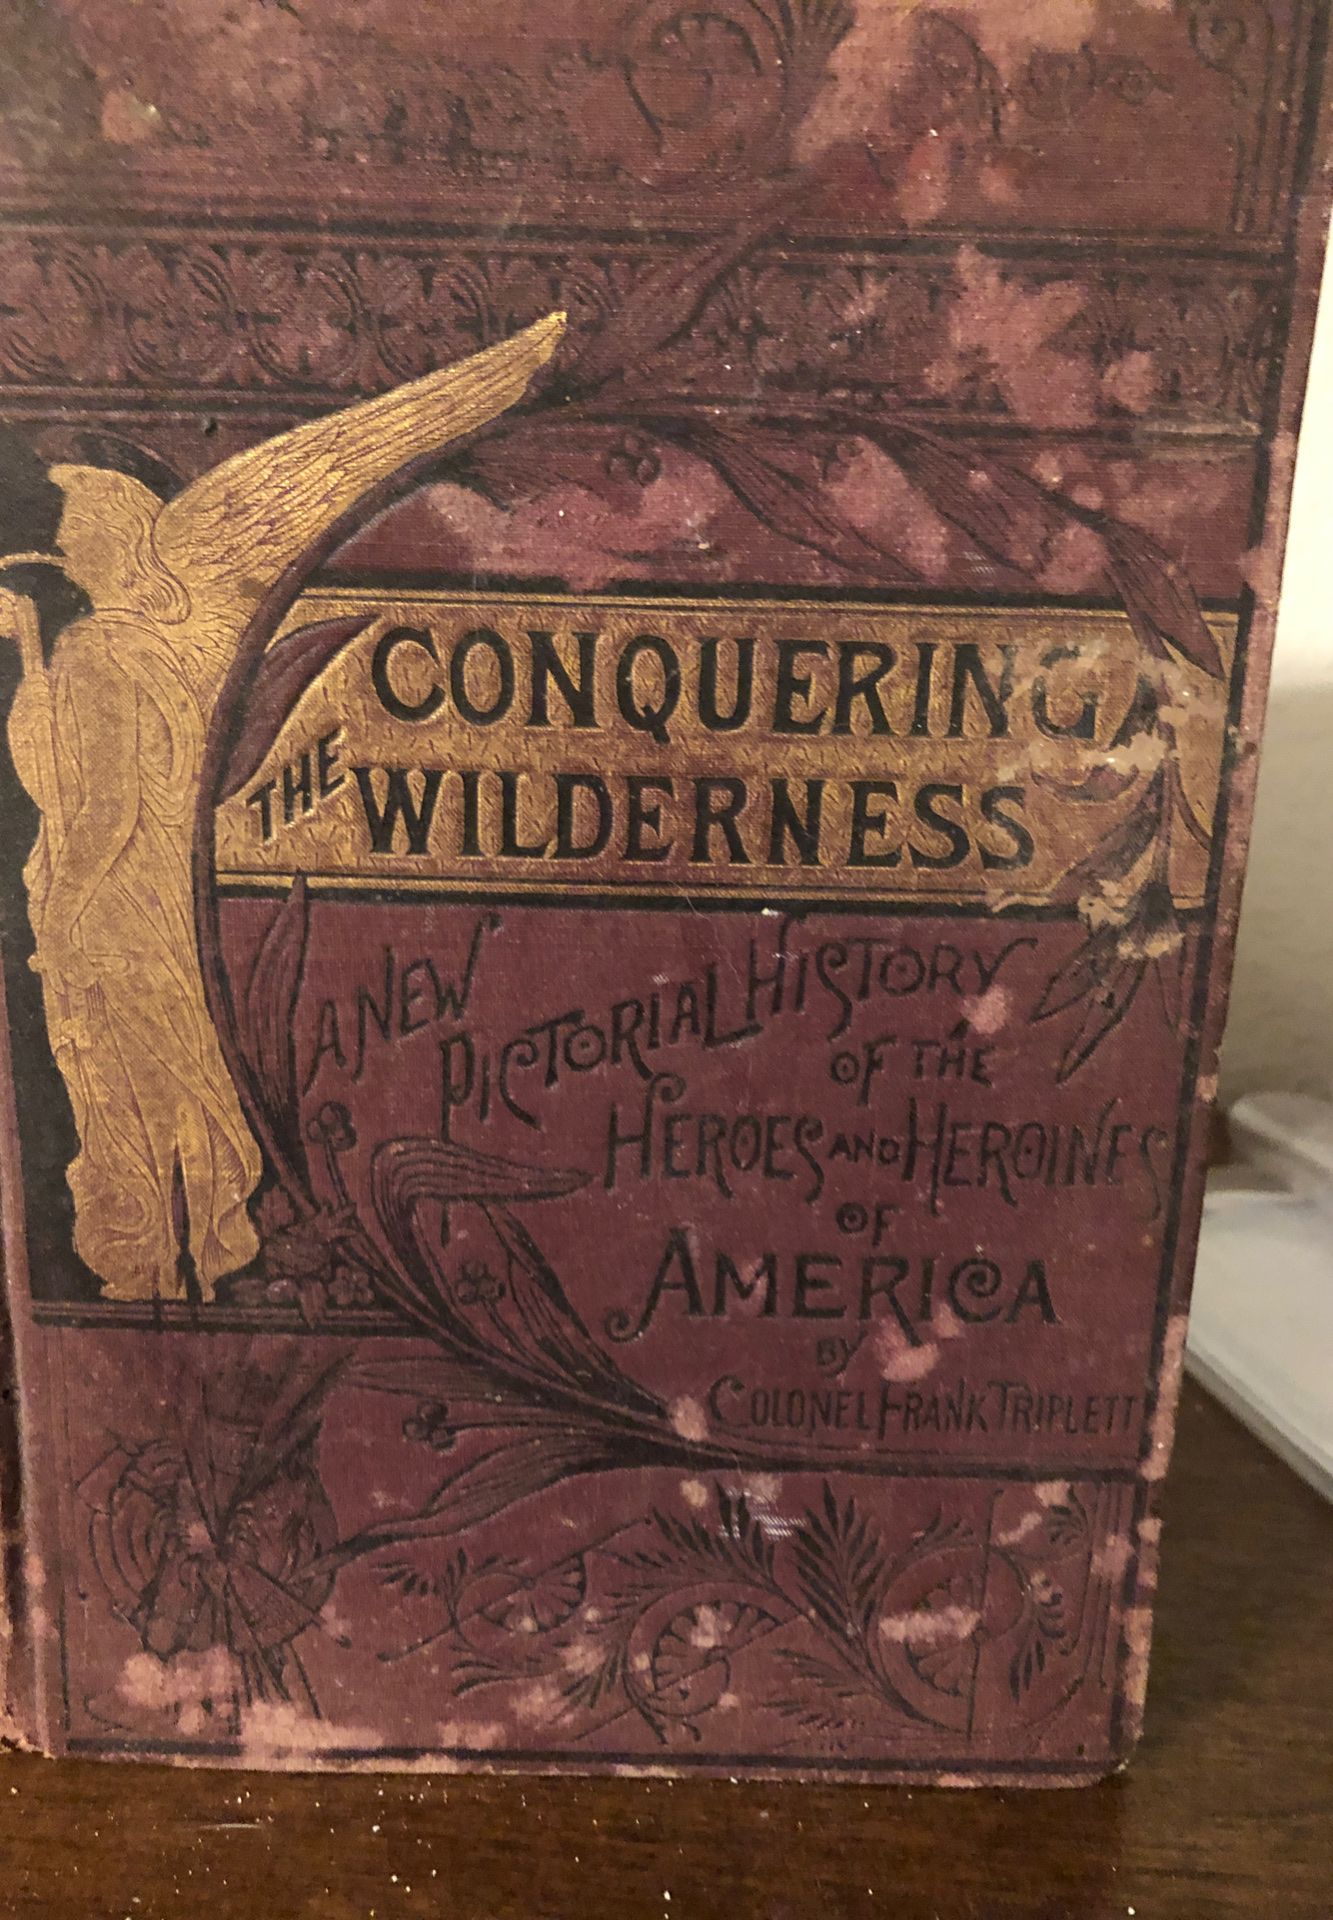 1888 Conquering the wilderness by Colonel Frank Triplett